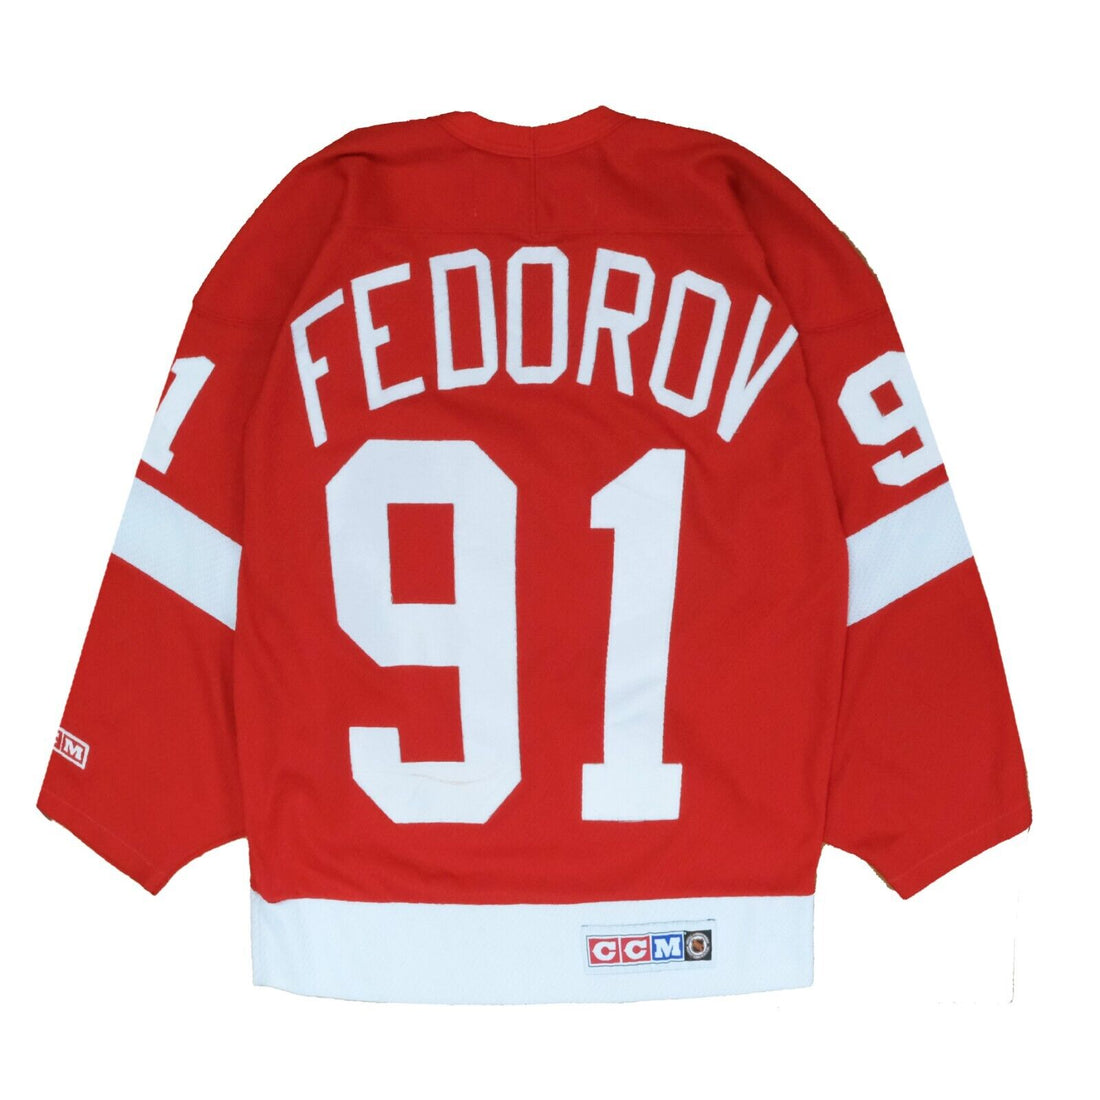 Throwback Vault - Vintage Detroit Red Wings Gear available in